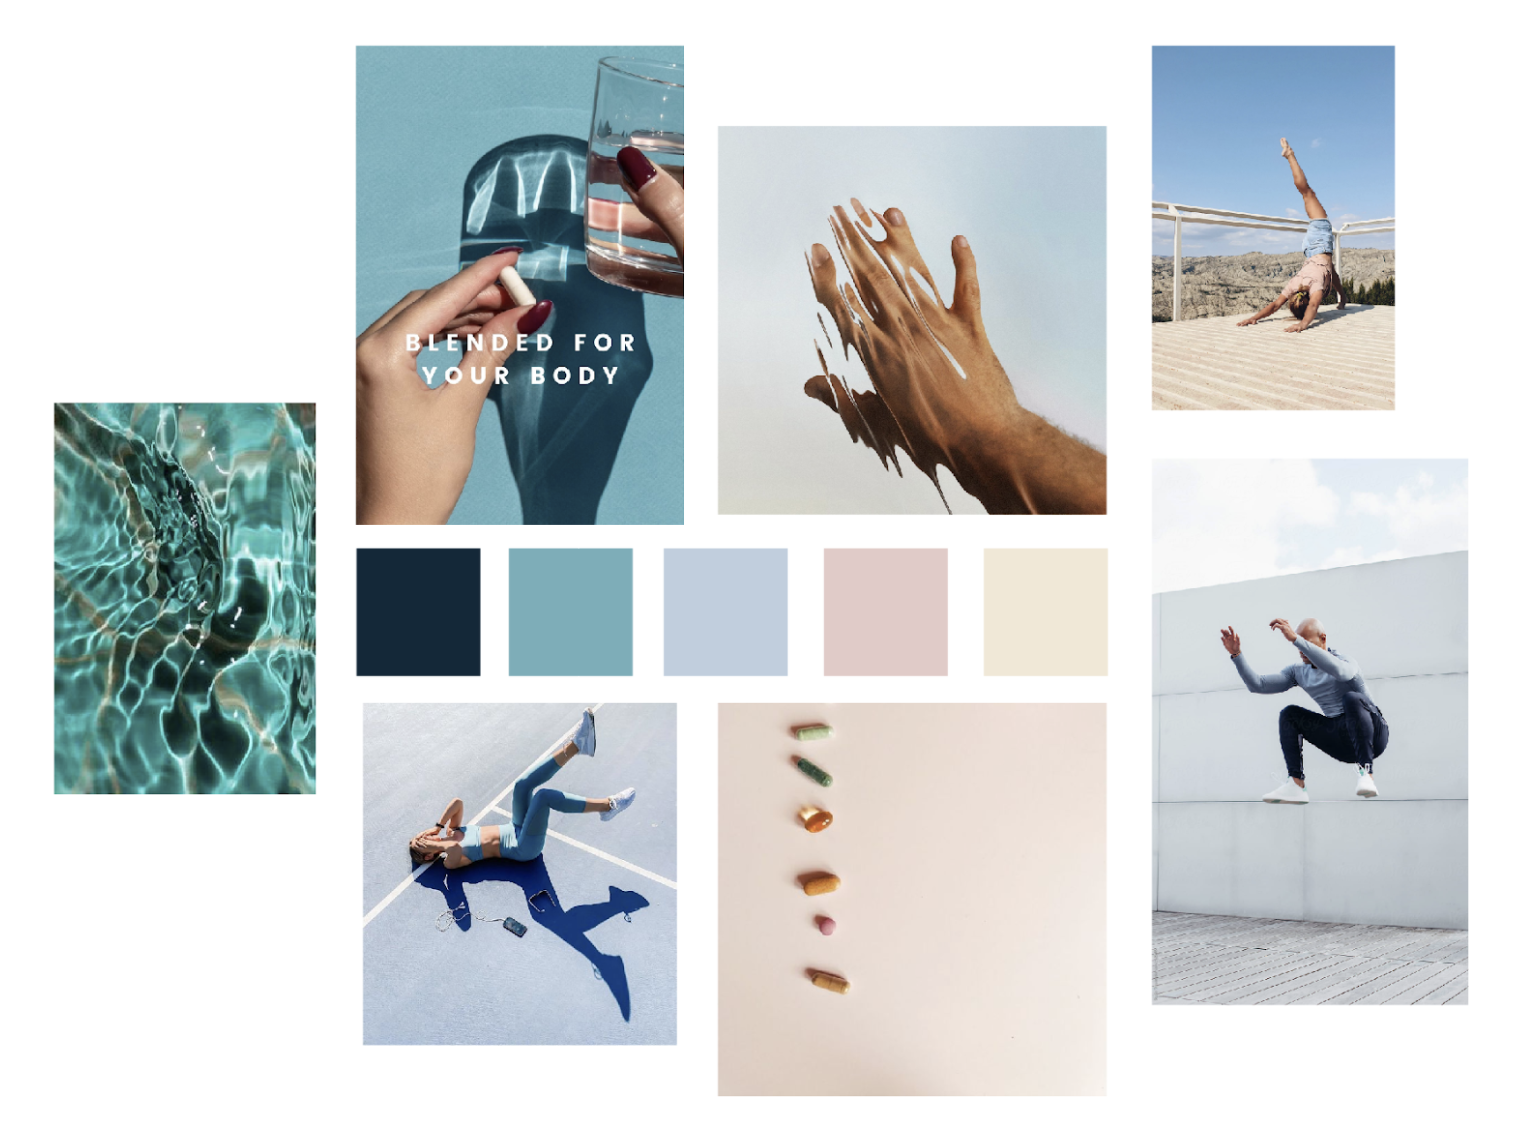 Moodboard featuring athletic photos and photos in various shades of blue and pink/beige.